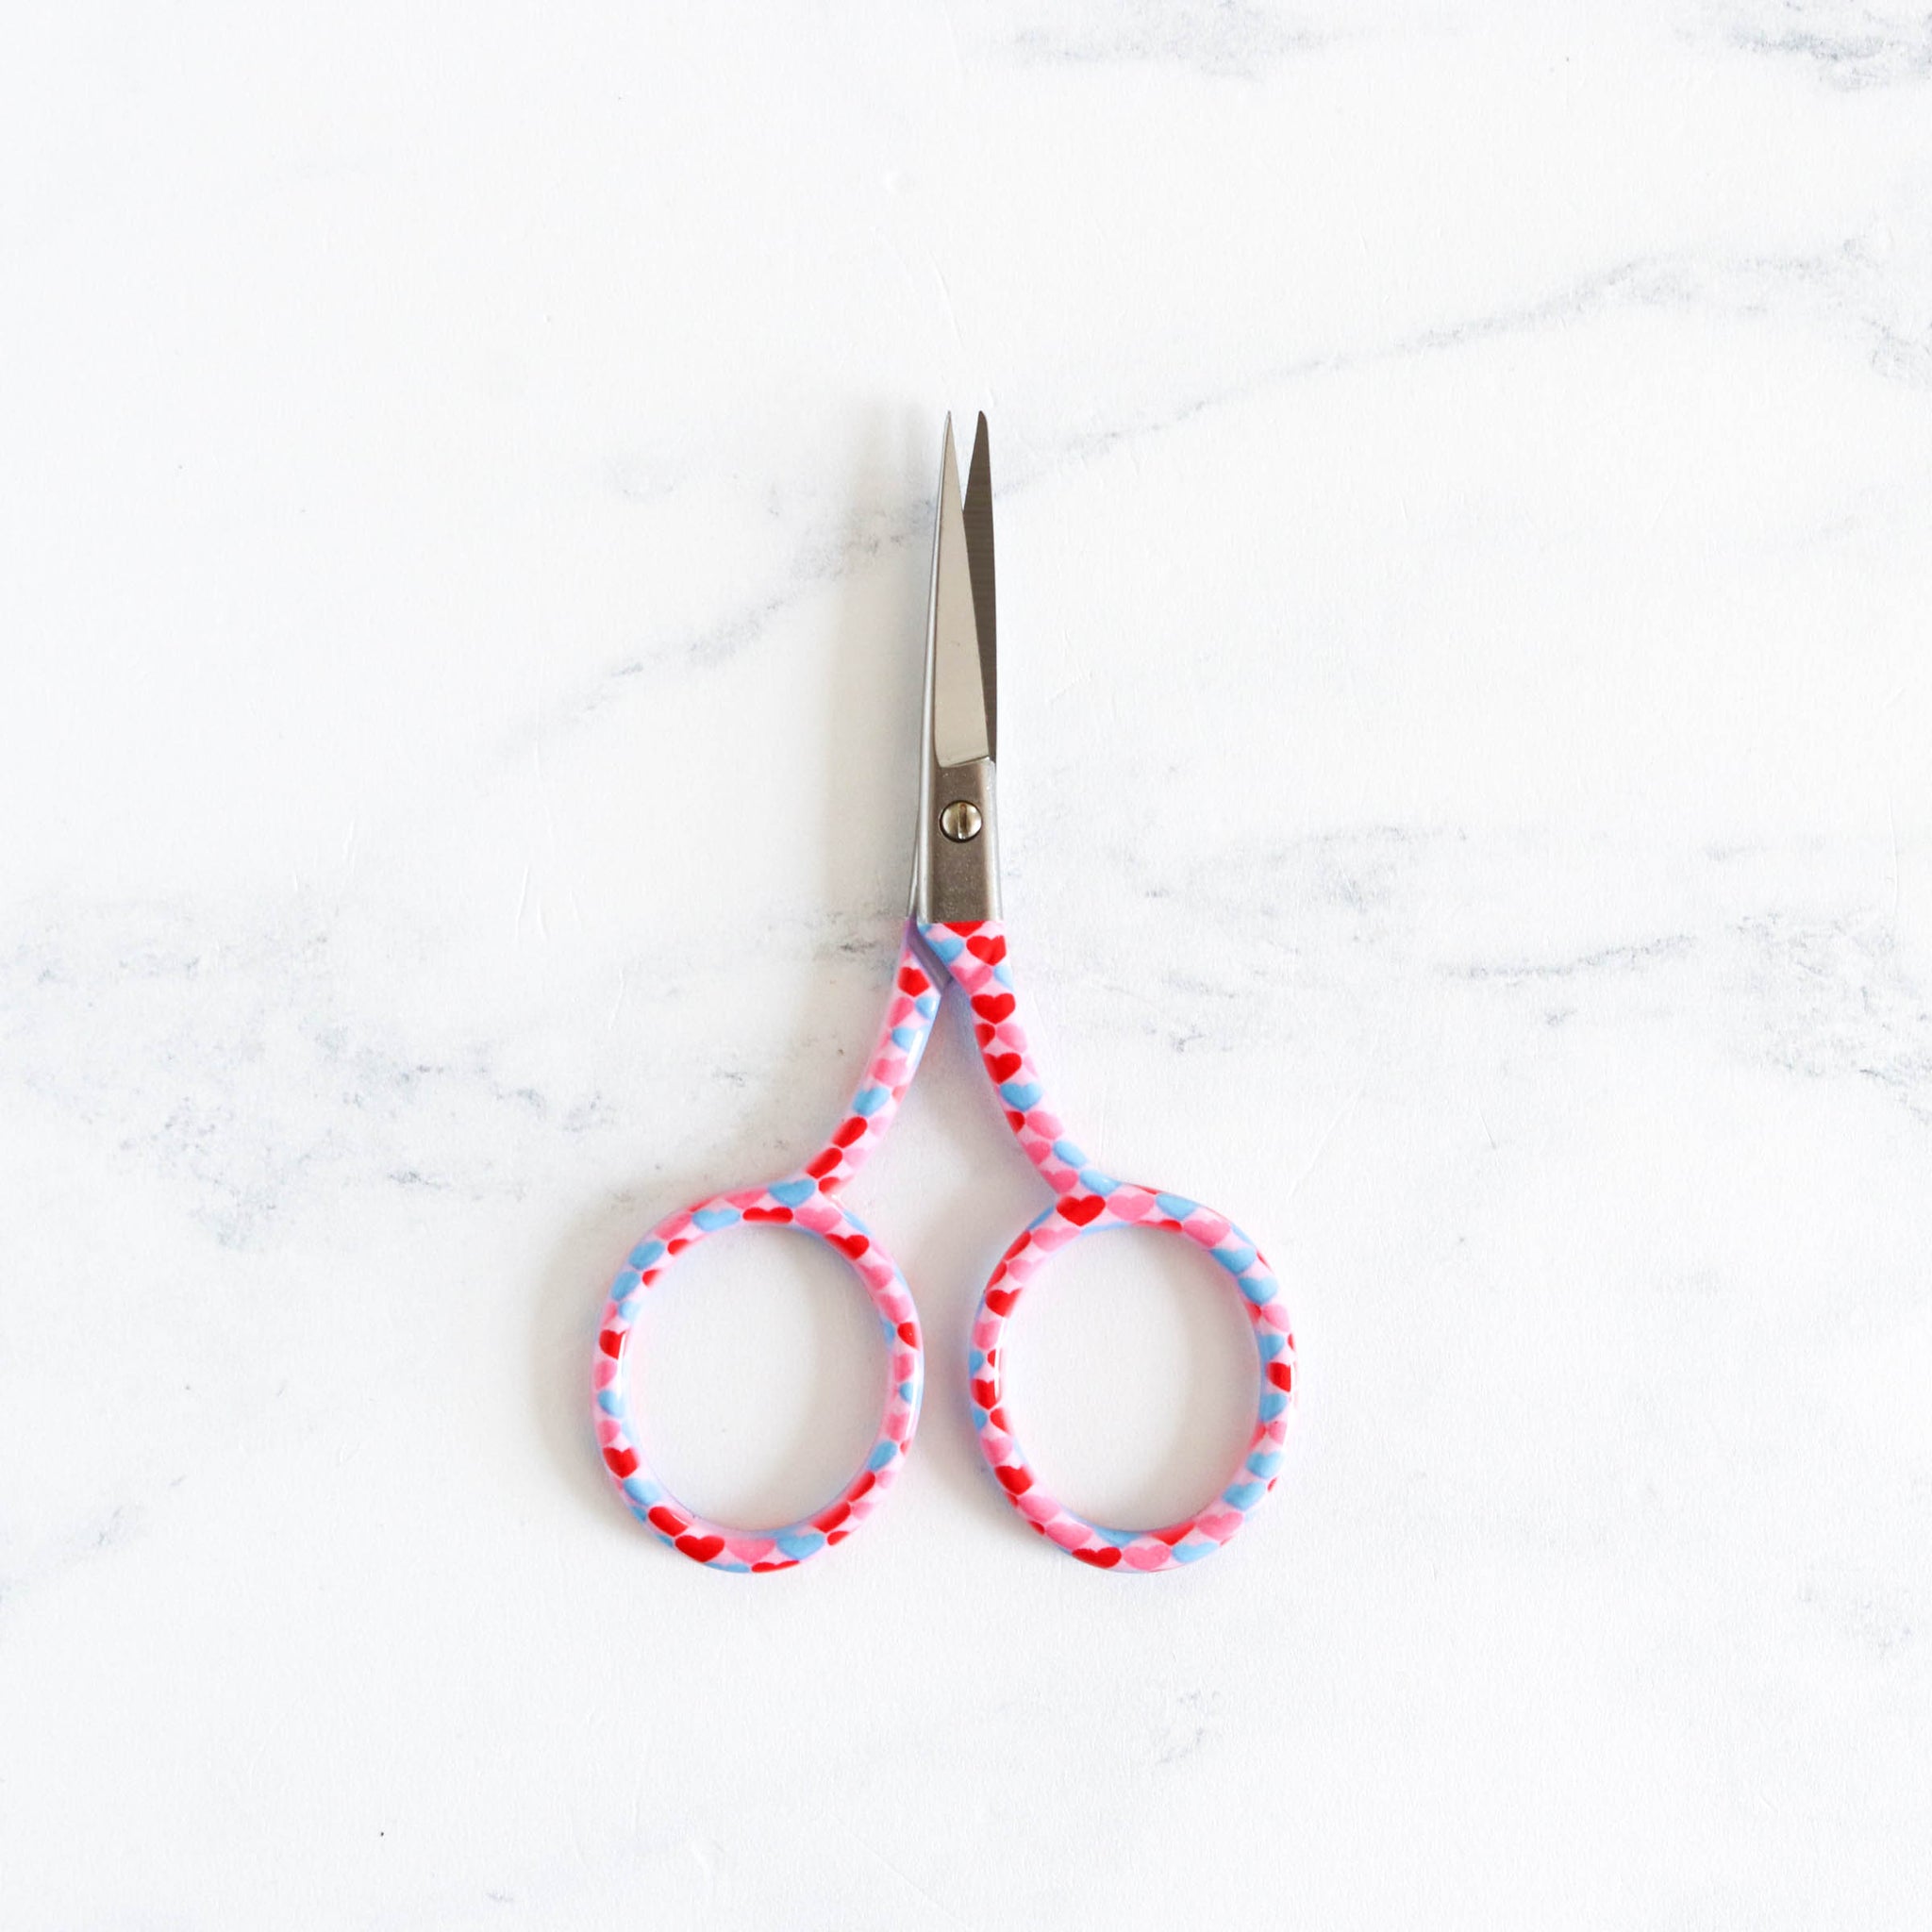 Letistitch Embroidery Scissors 20417 Red-Matte handles